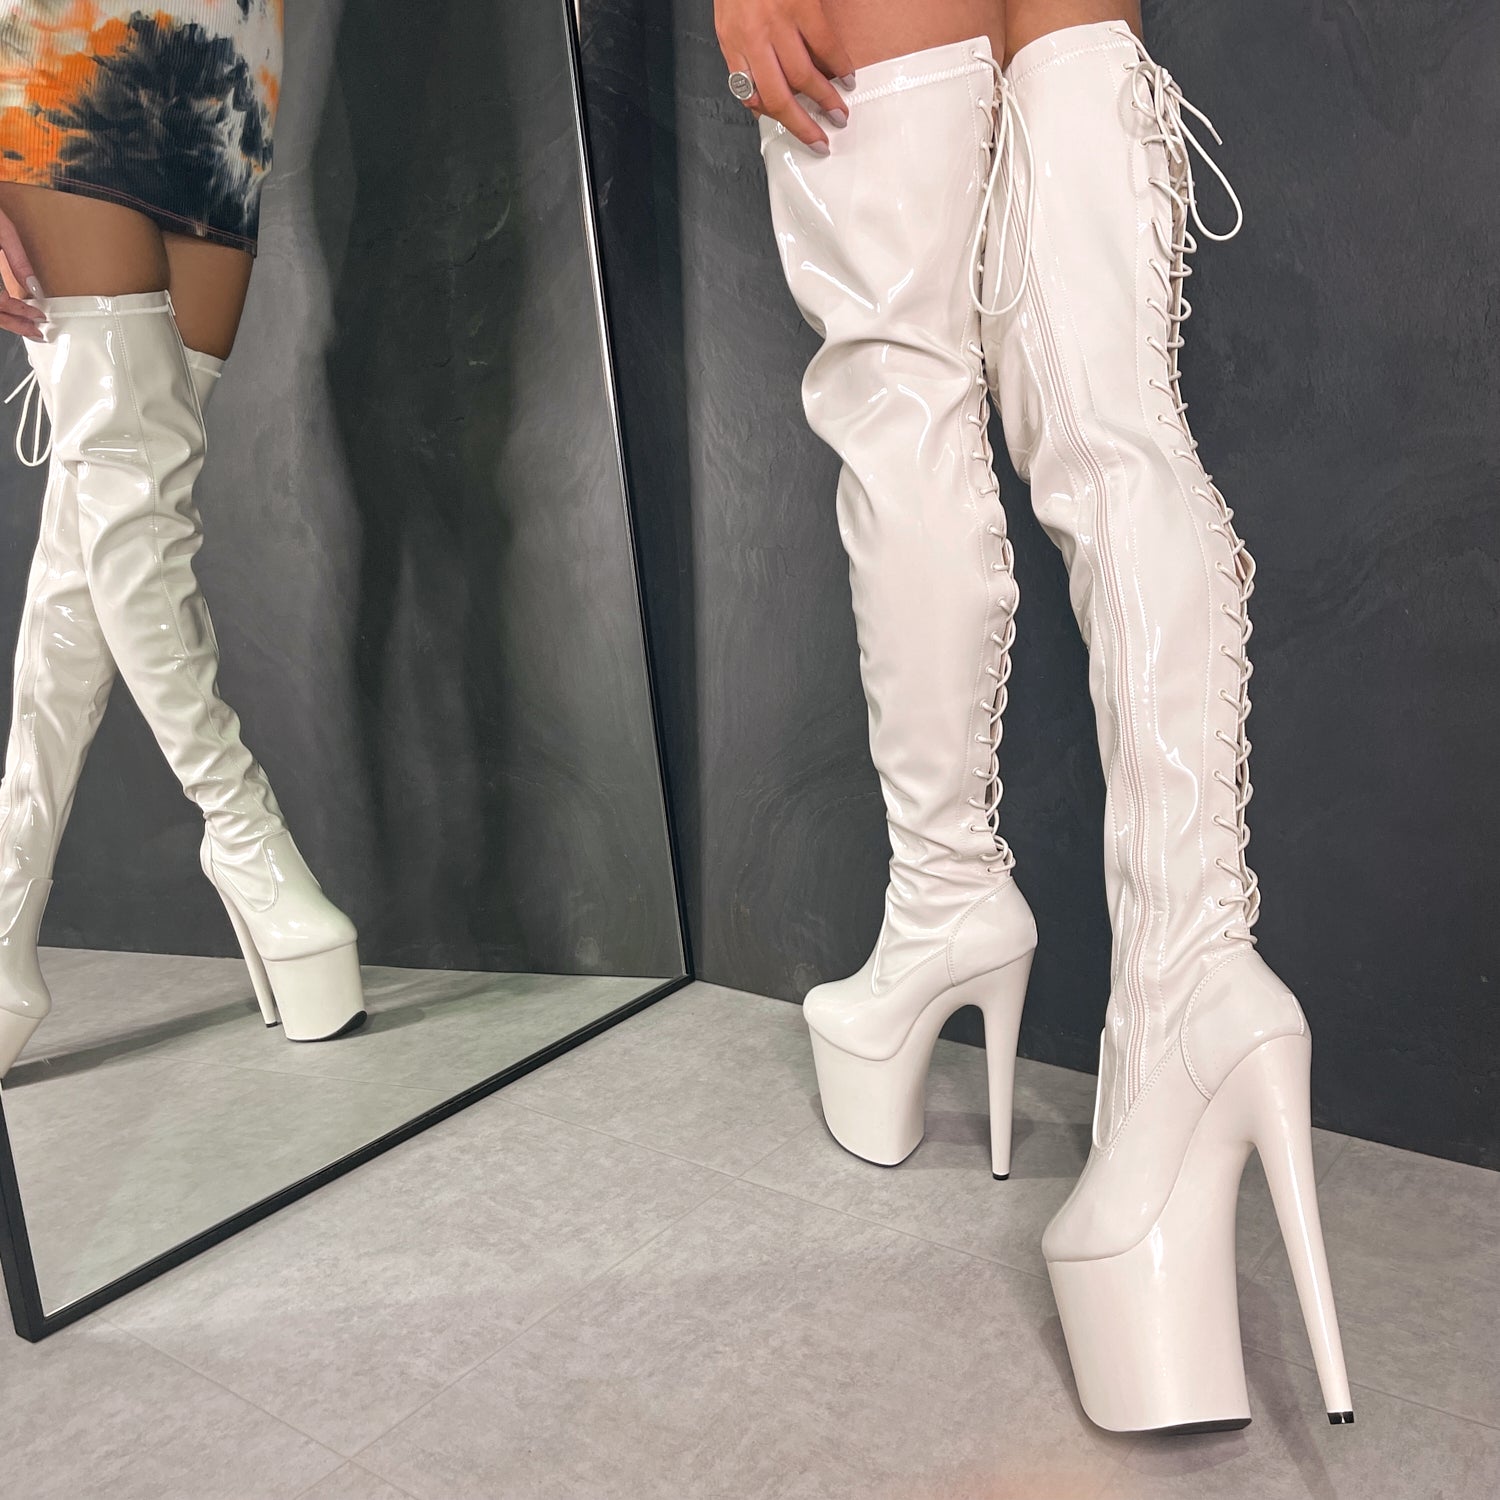 How Many Thigh-High Boots Can You Spot On These VS Angels